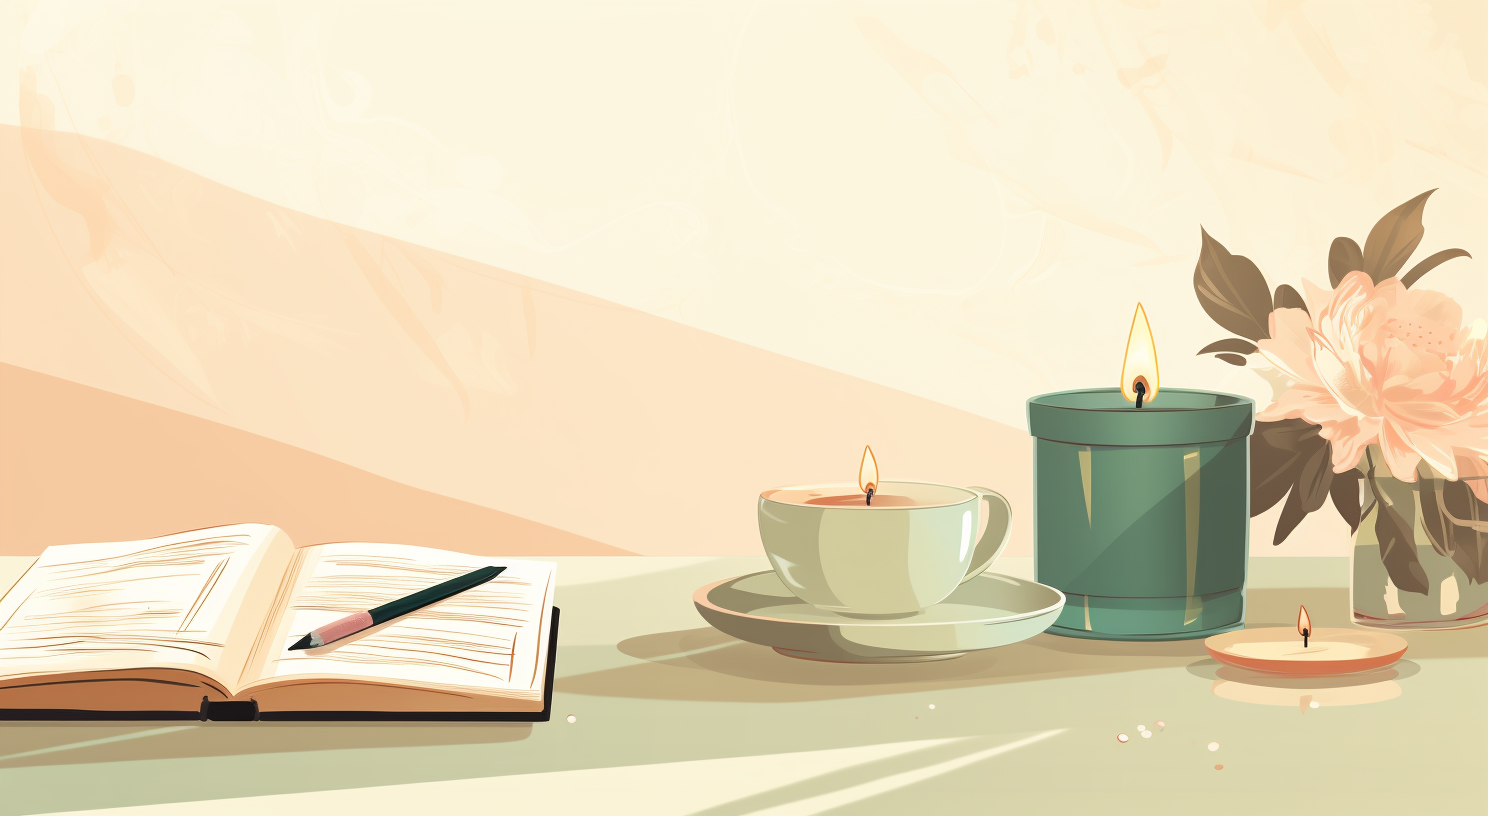 An illustrated image of a journal and pen on a green table with three lit candles and a vase of flowers surrounding it